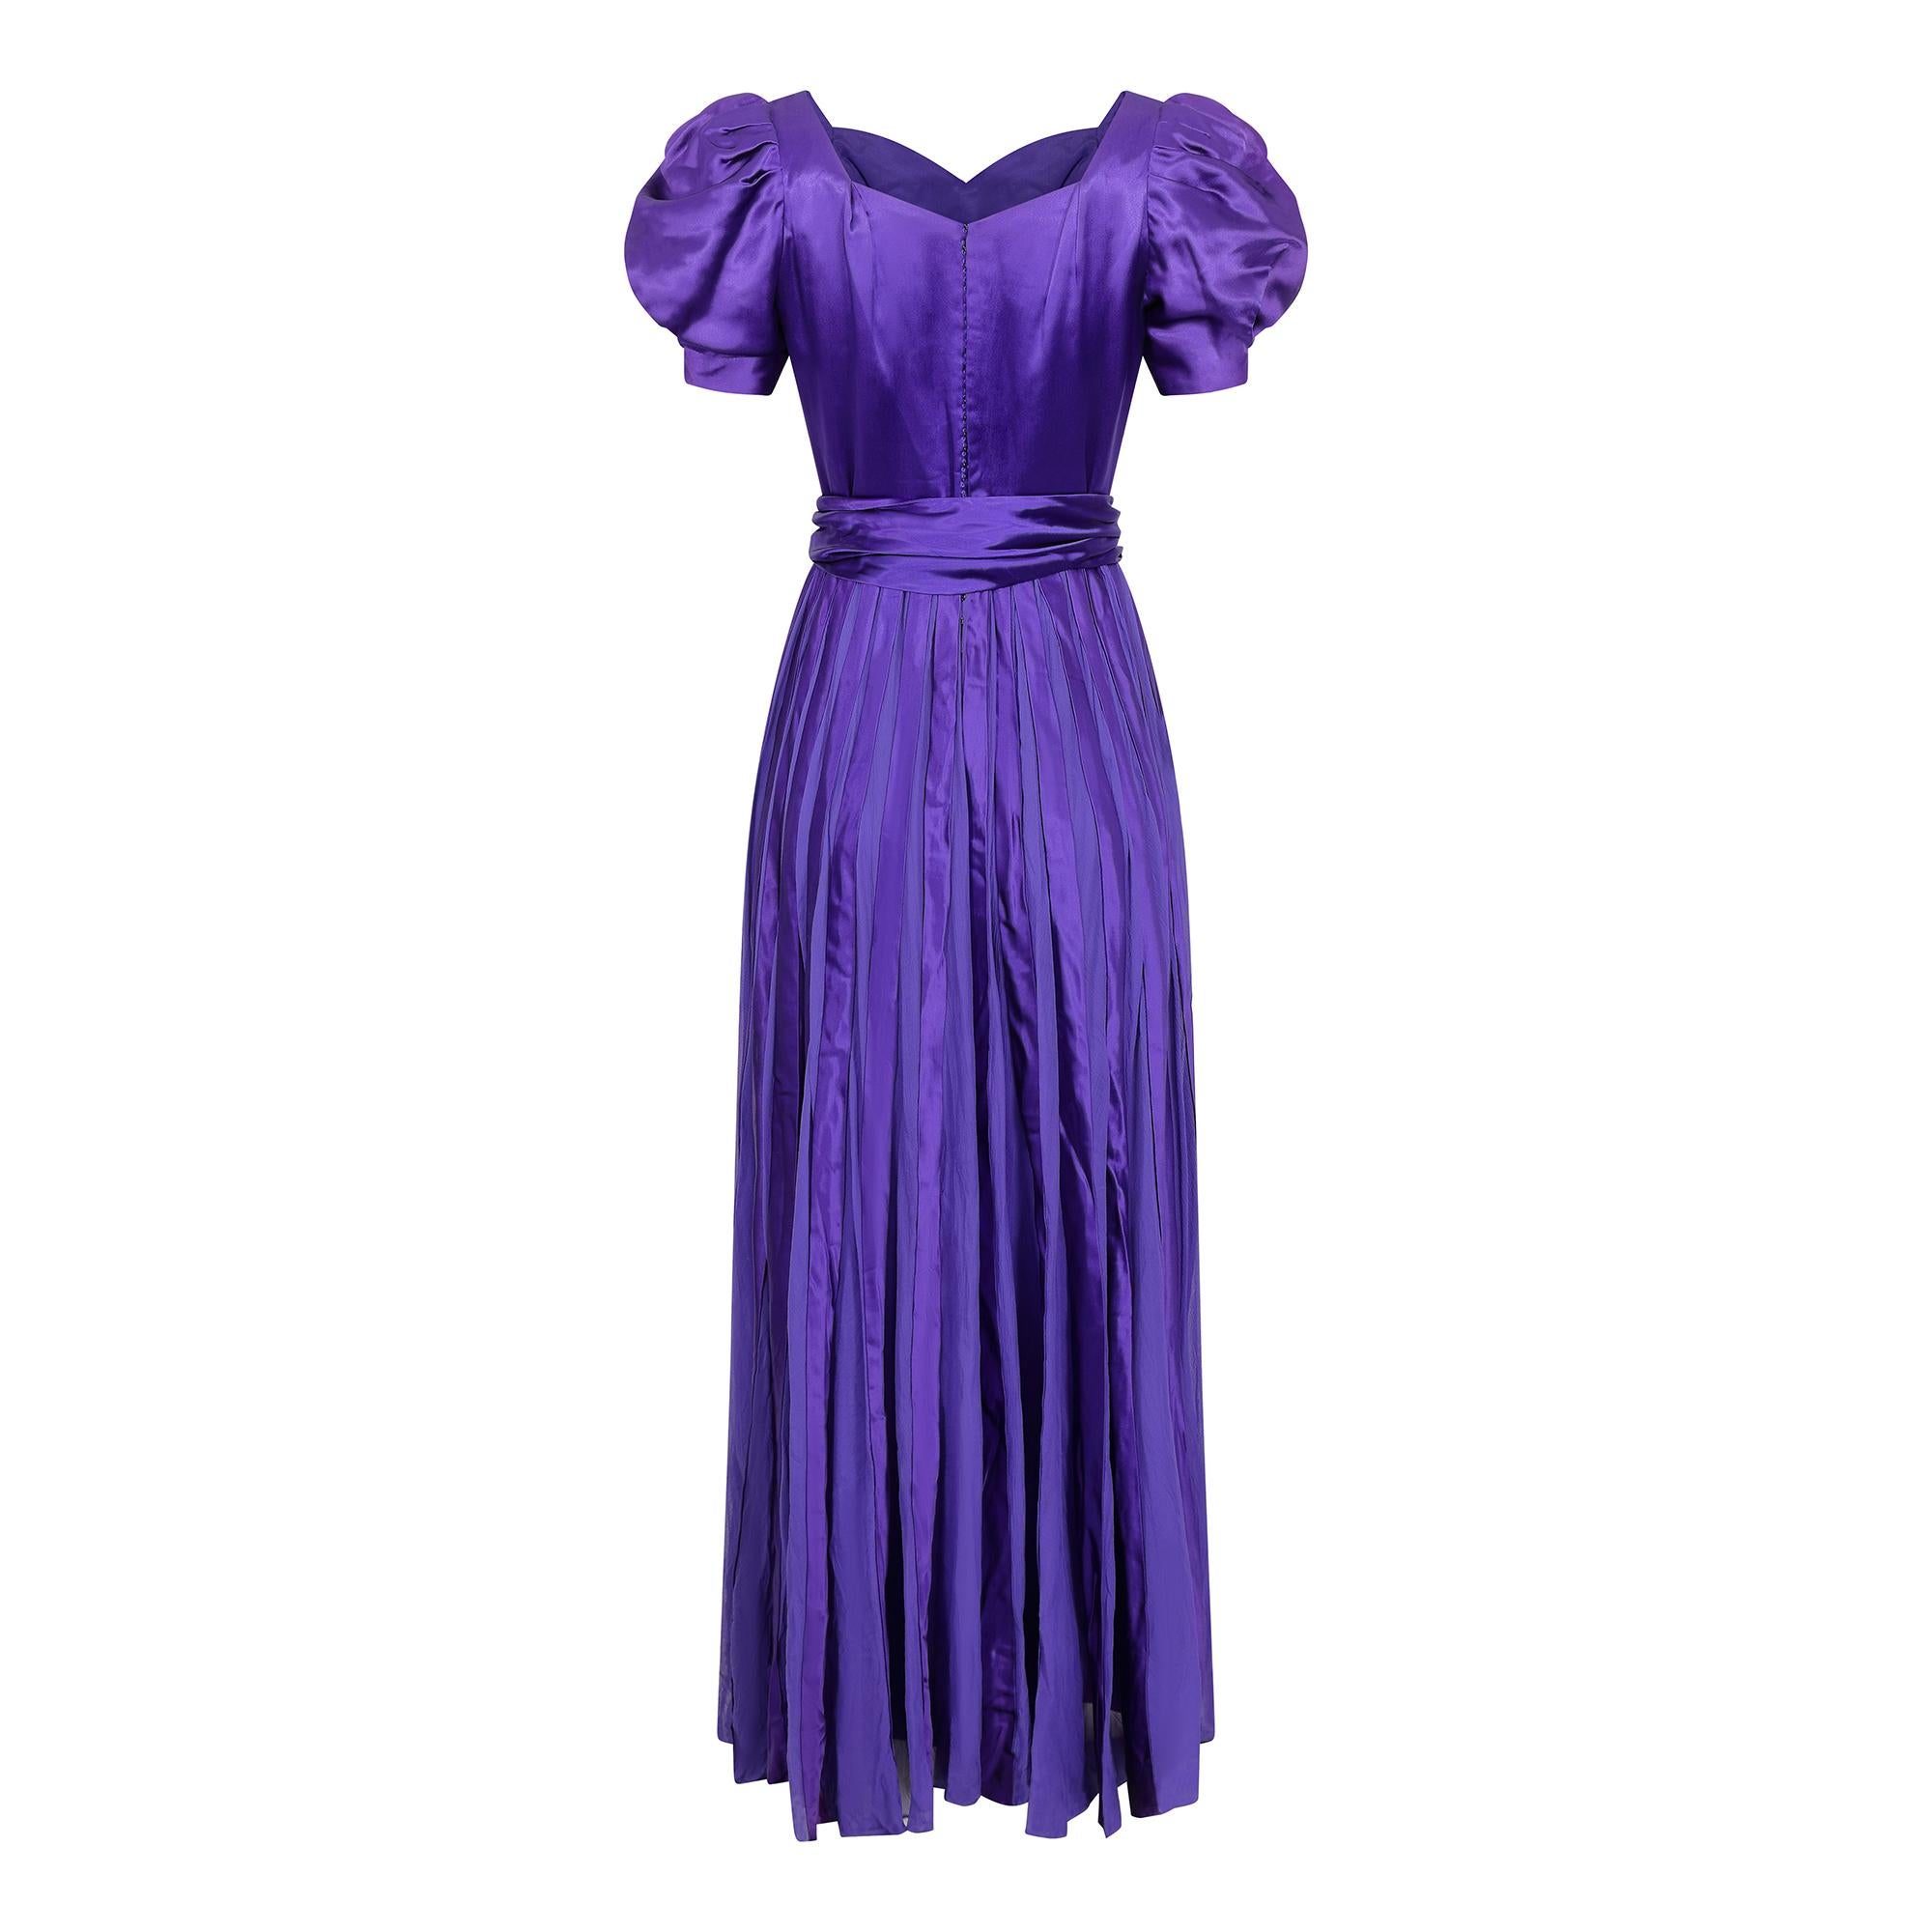 1940s Haute Couture Purple Satin Chiffon Dress In Excellent Condition For Sale In London, GB